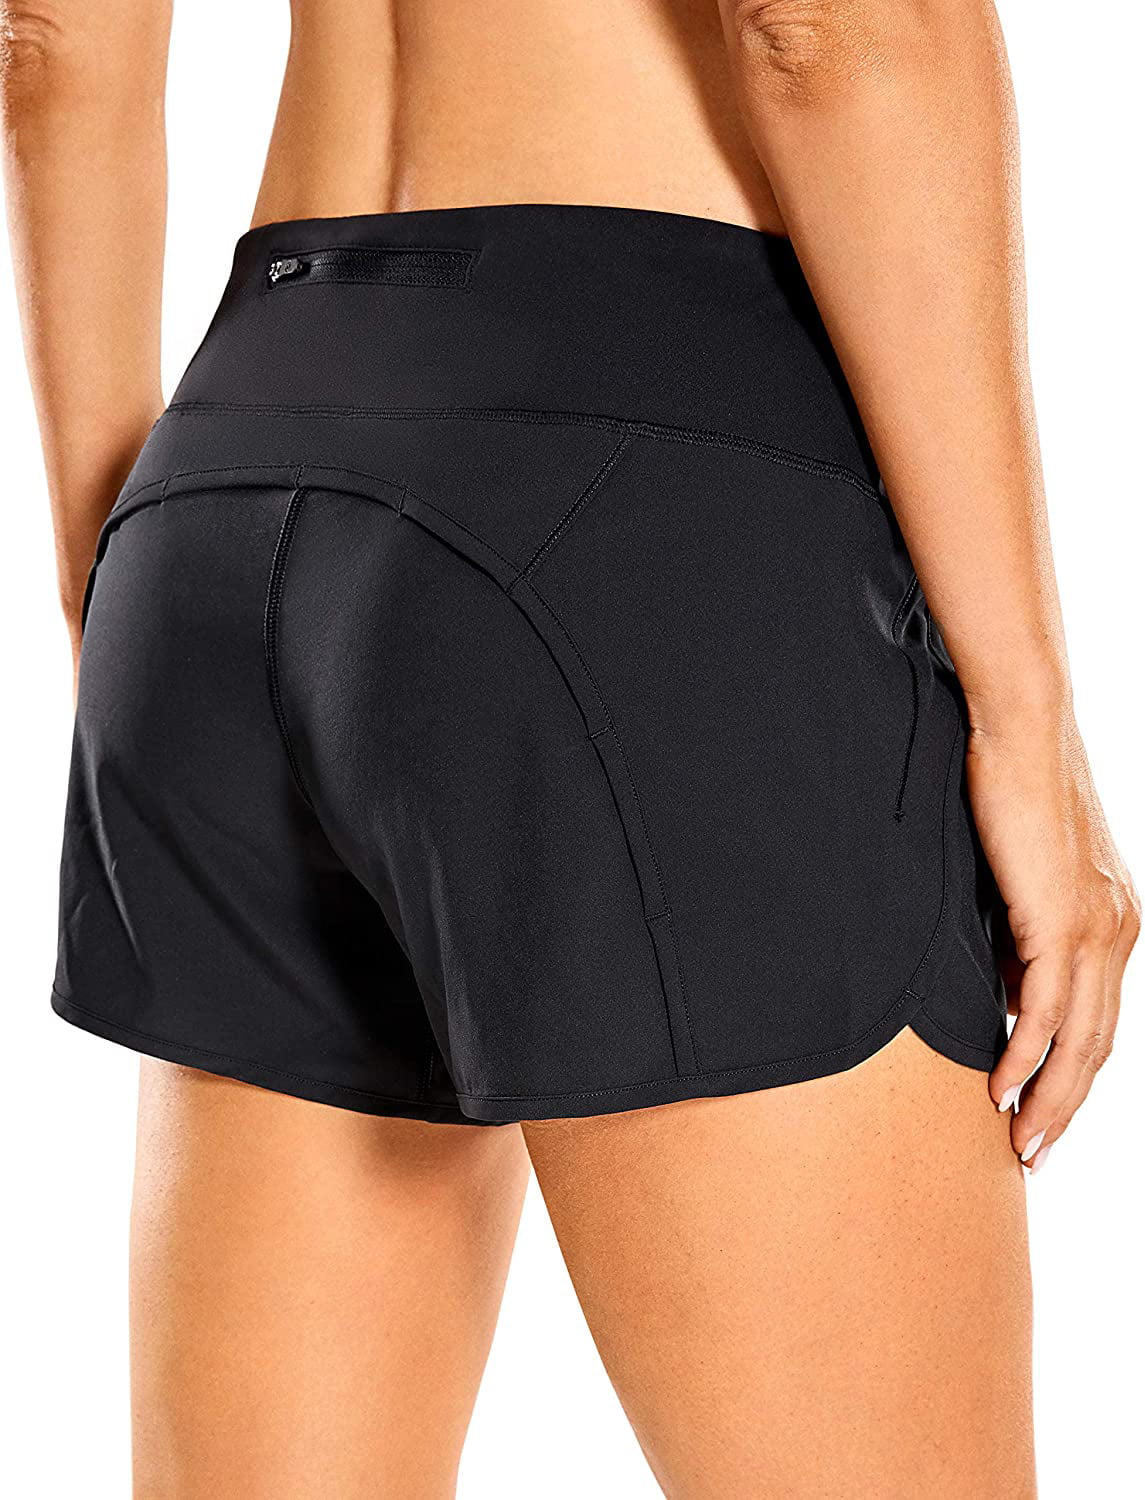 WIIKWEEK Womens Lightweight Gym Athletic Workout Shorts Liner 4